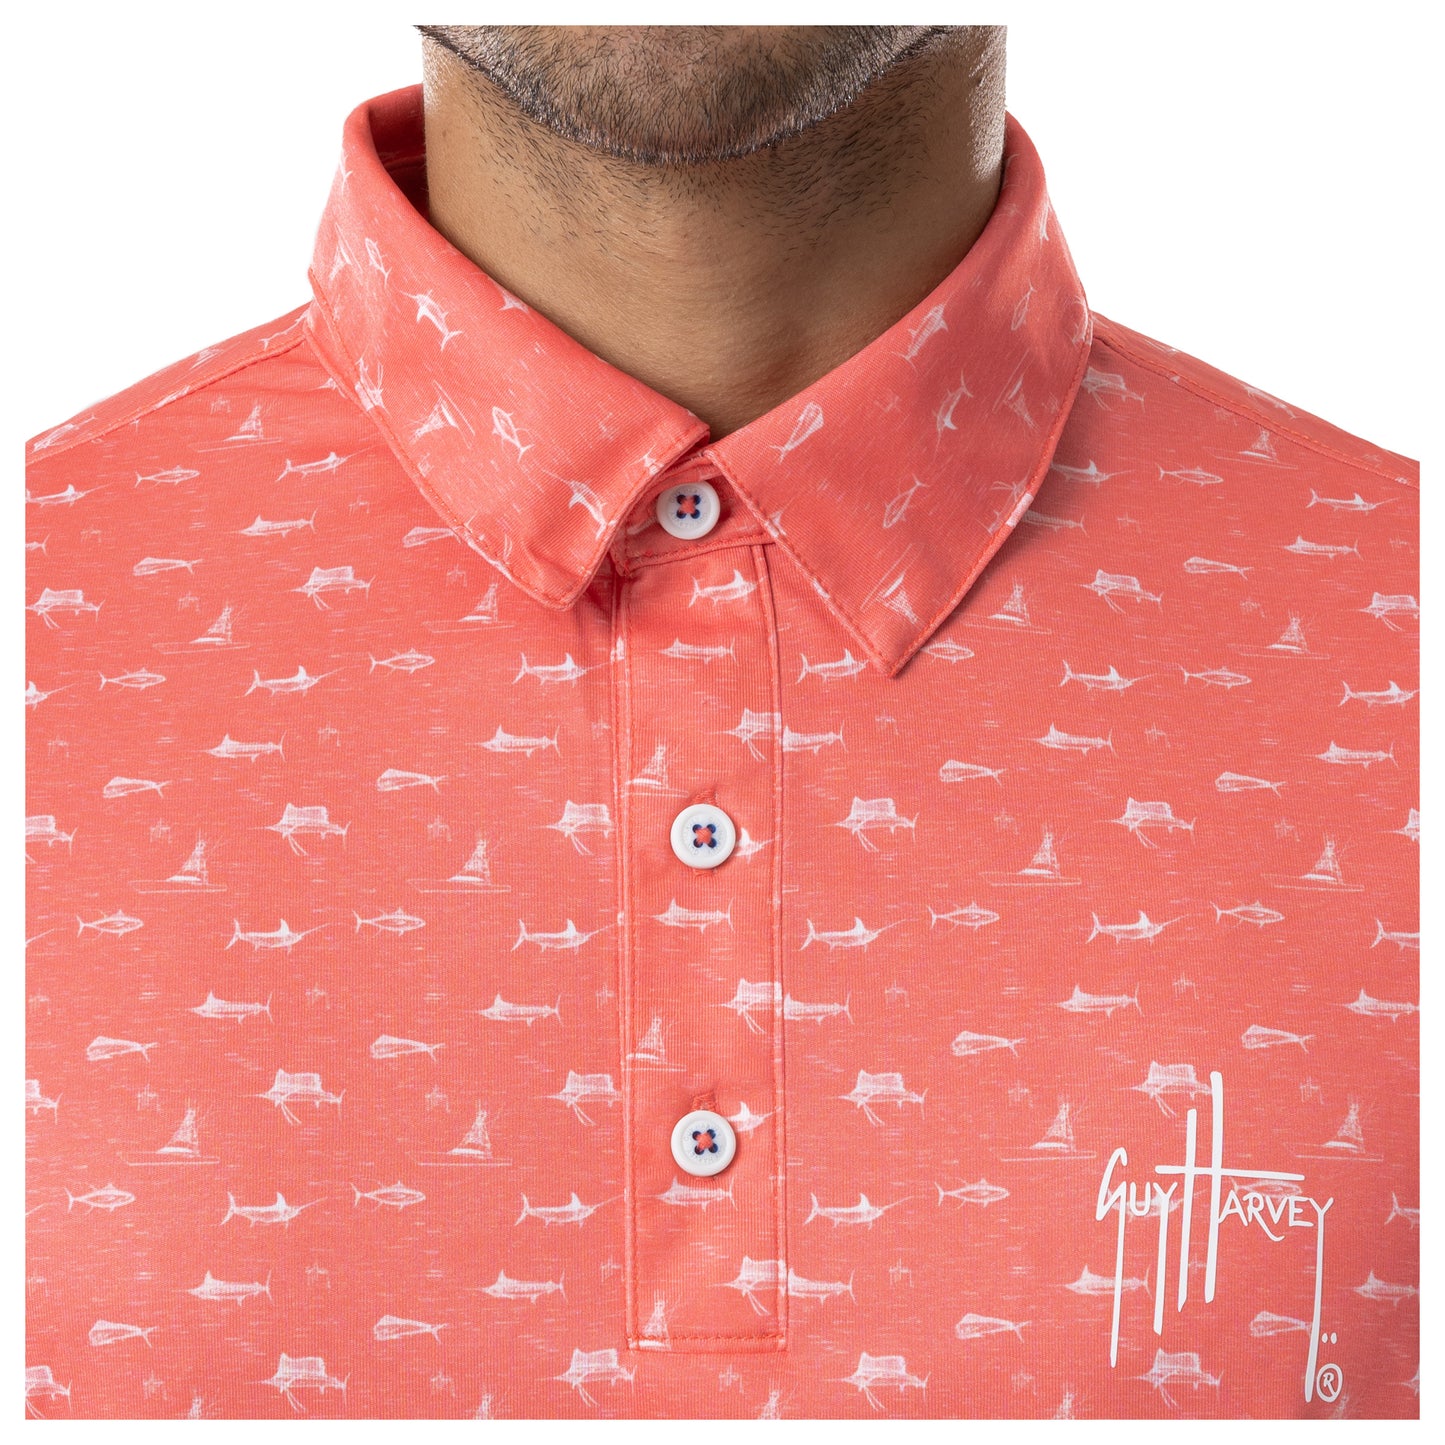 Men's Short Sleeve Coral Printed Performance Polo Shirt